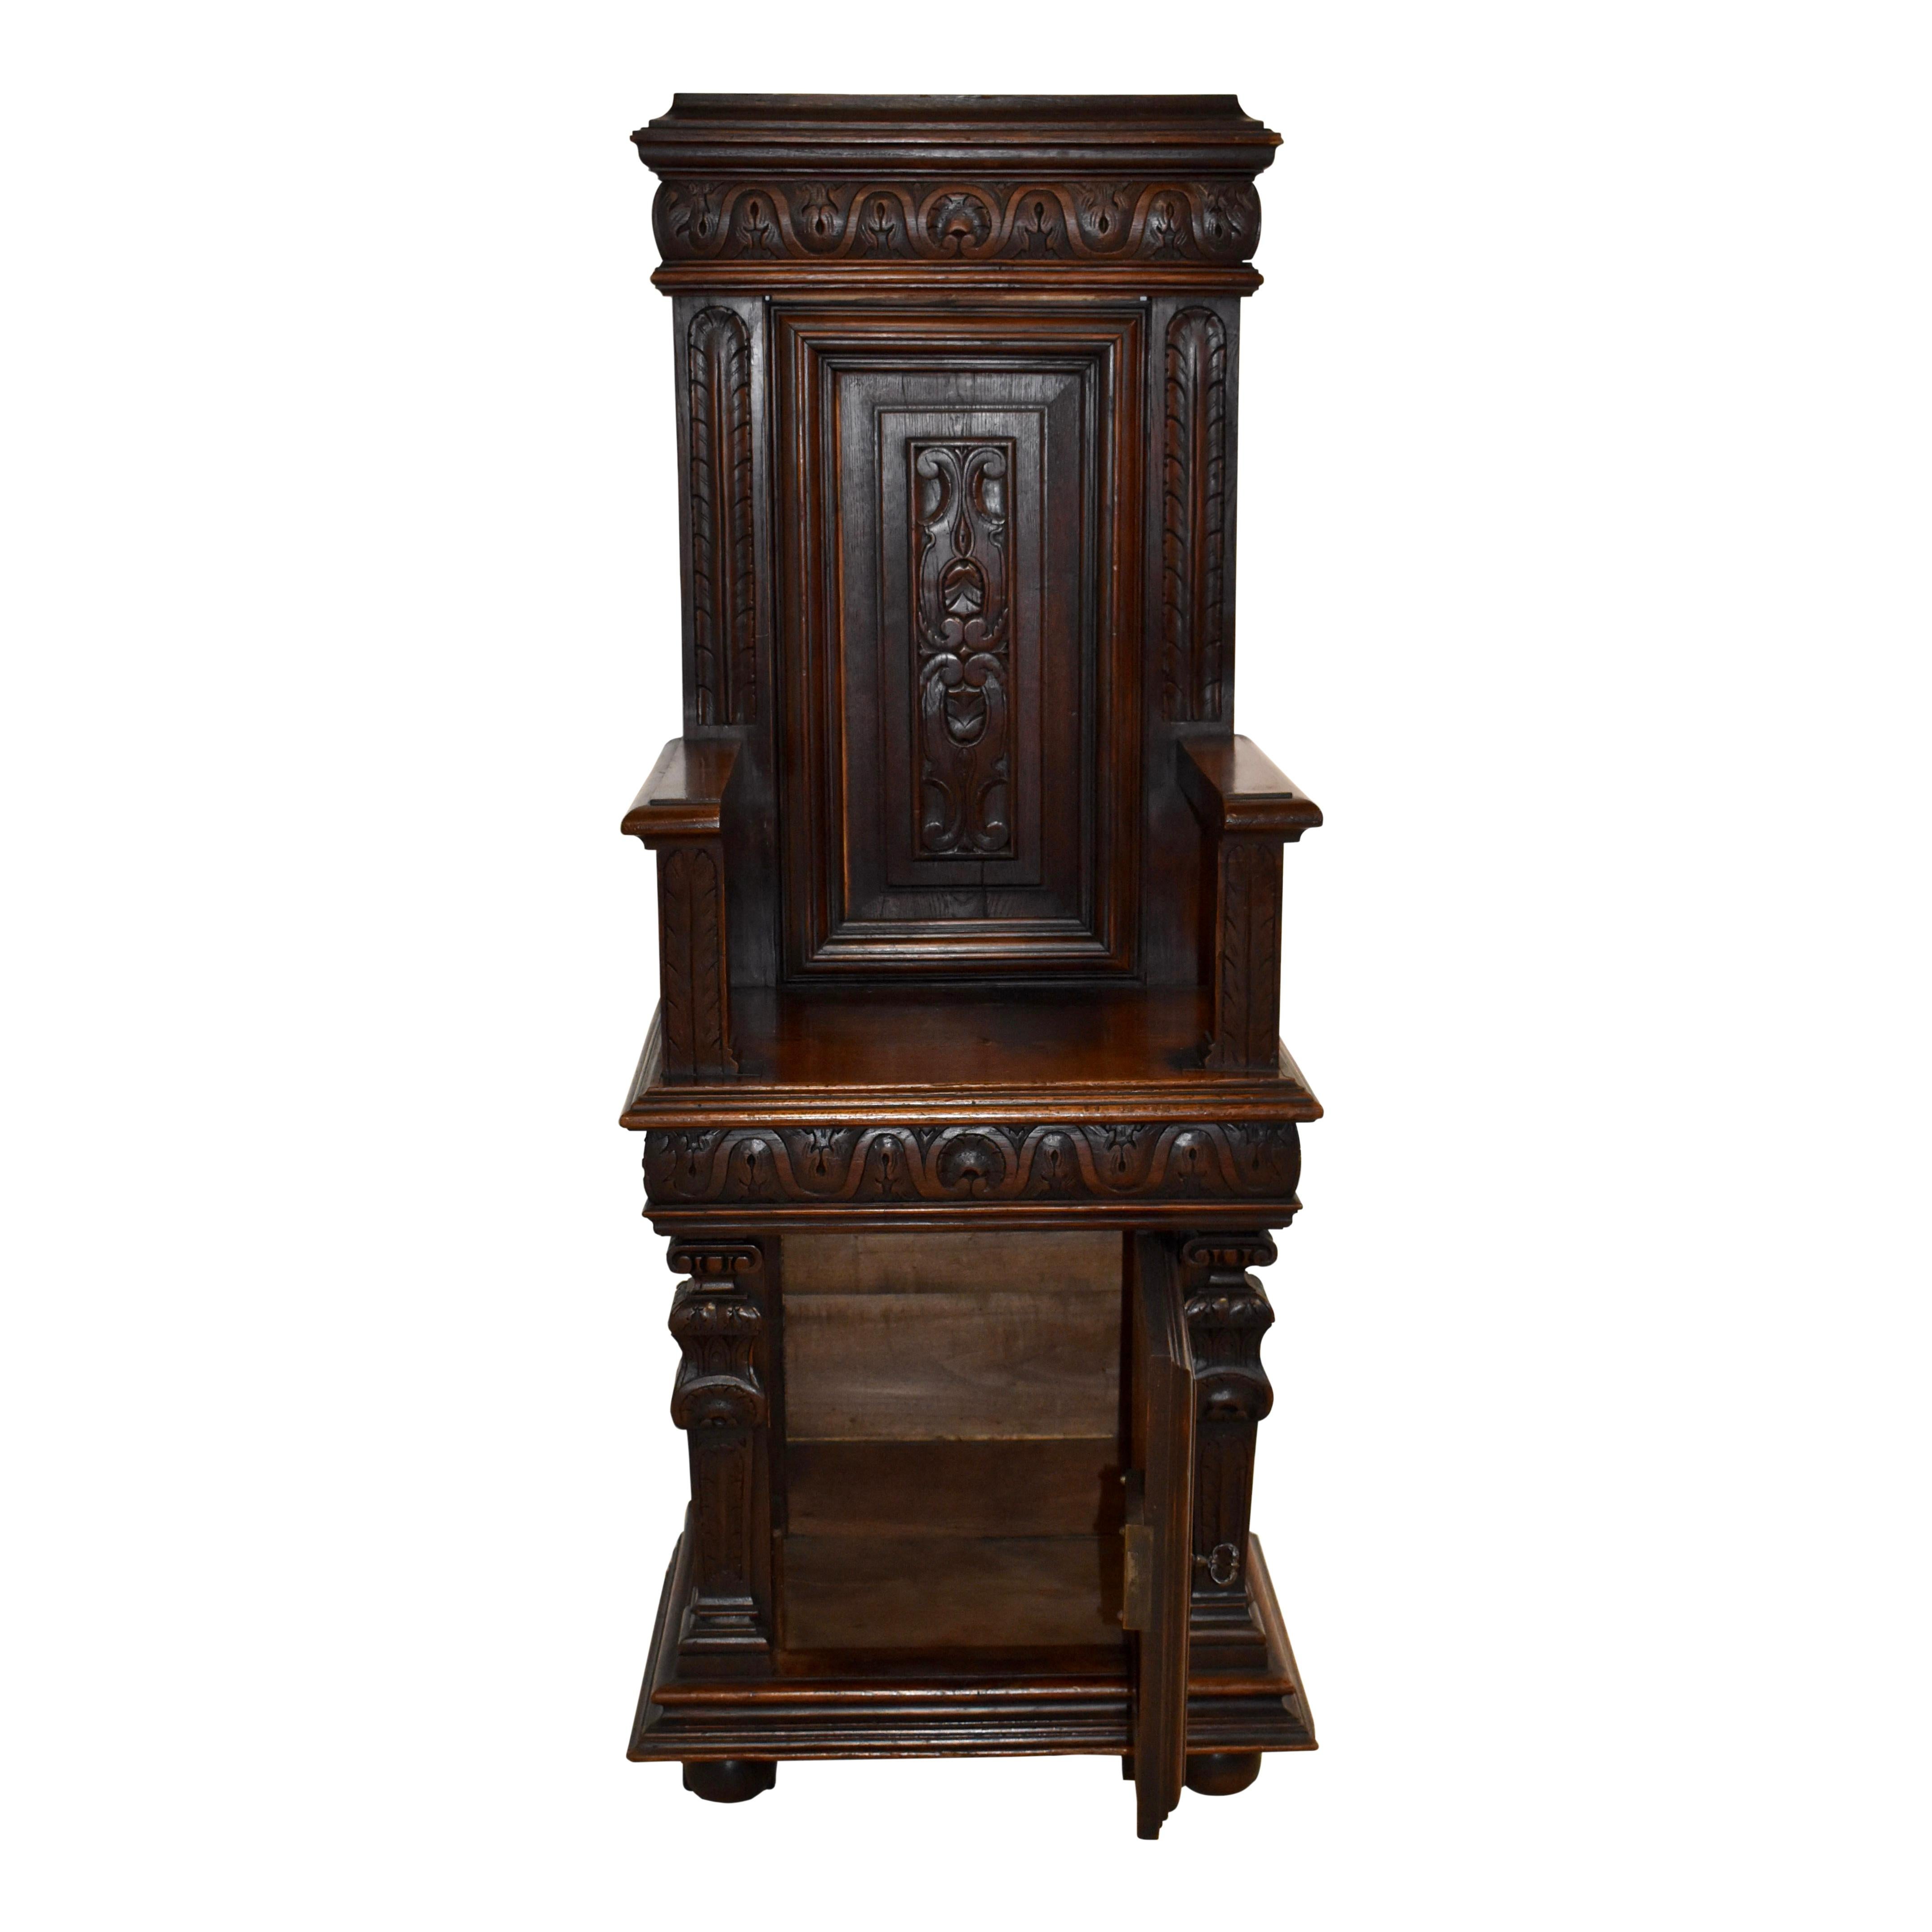 Fit for a king or queen, this royal-looking hall chair was actually designed for a bishop. Bishop's chairs were larger than other seating in the church as a symbol of the immense responsibility placed on the bishop. This chair is made of oak and